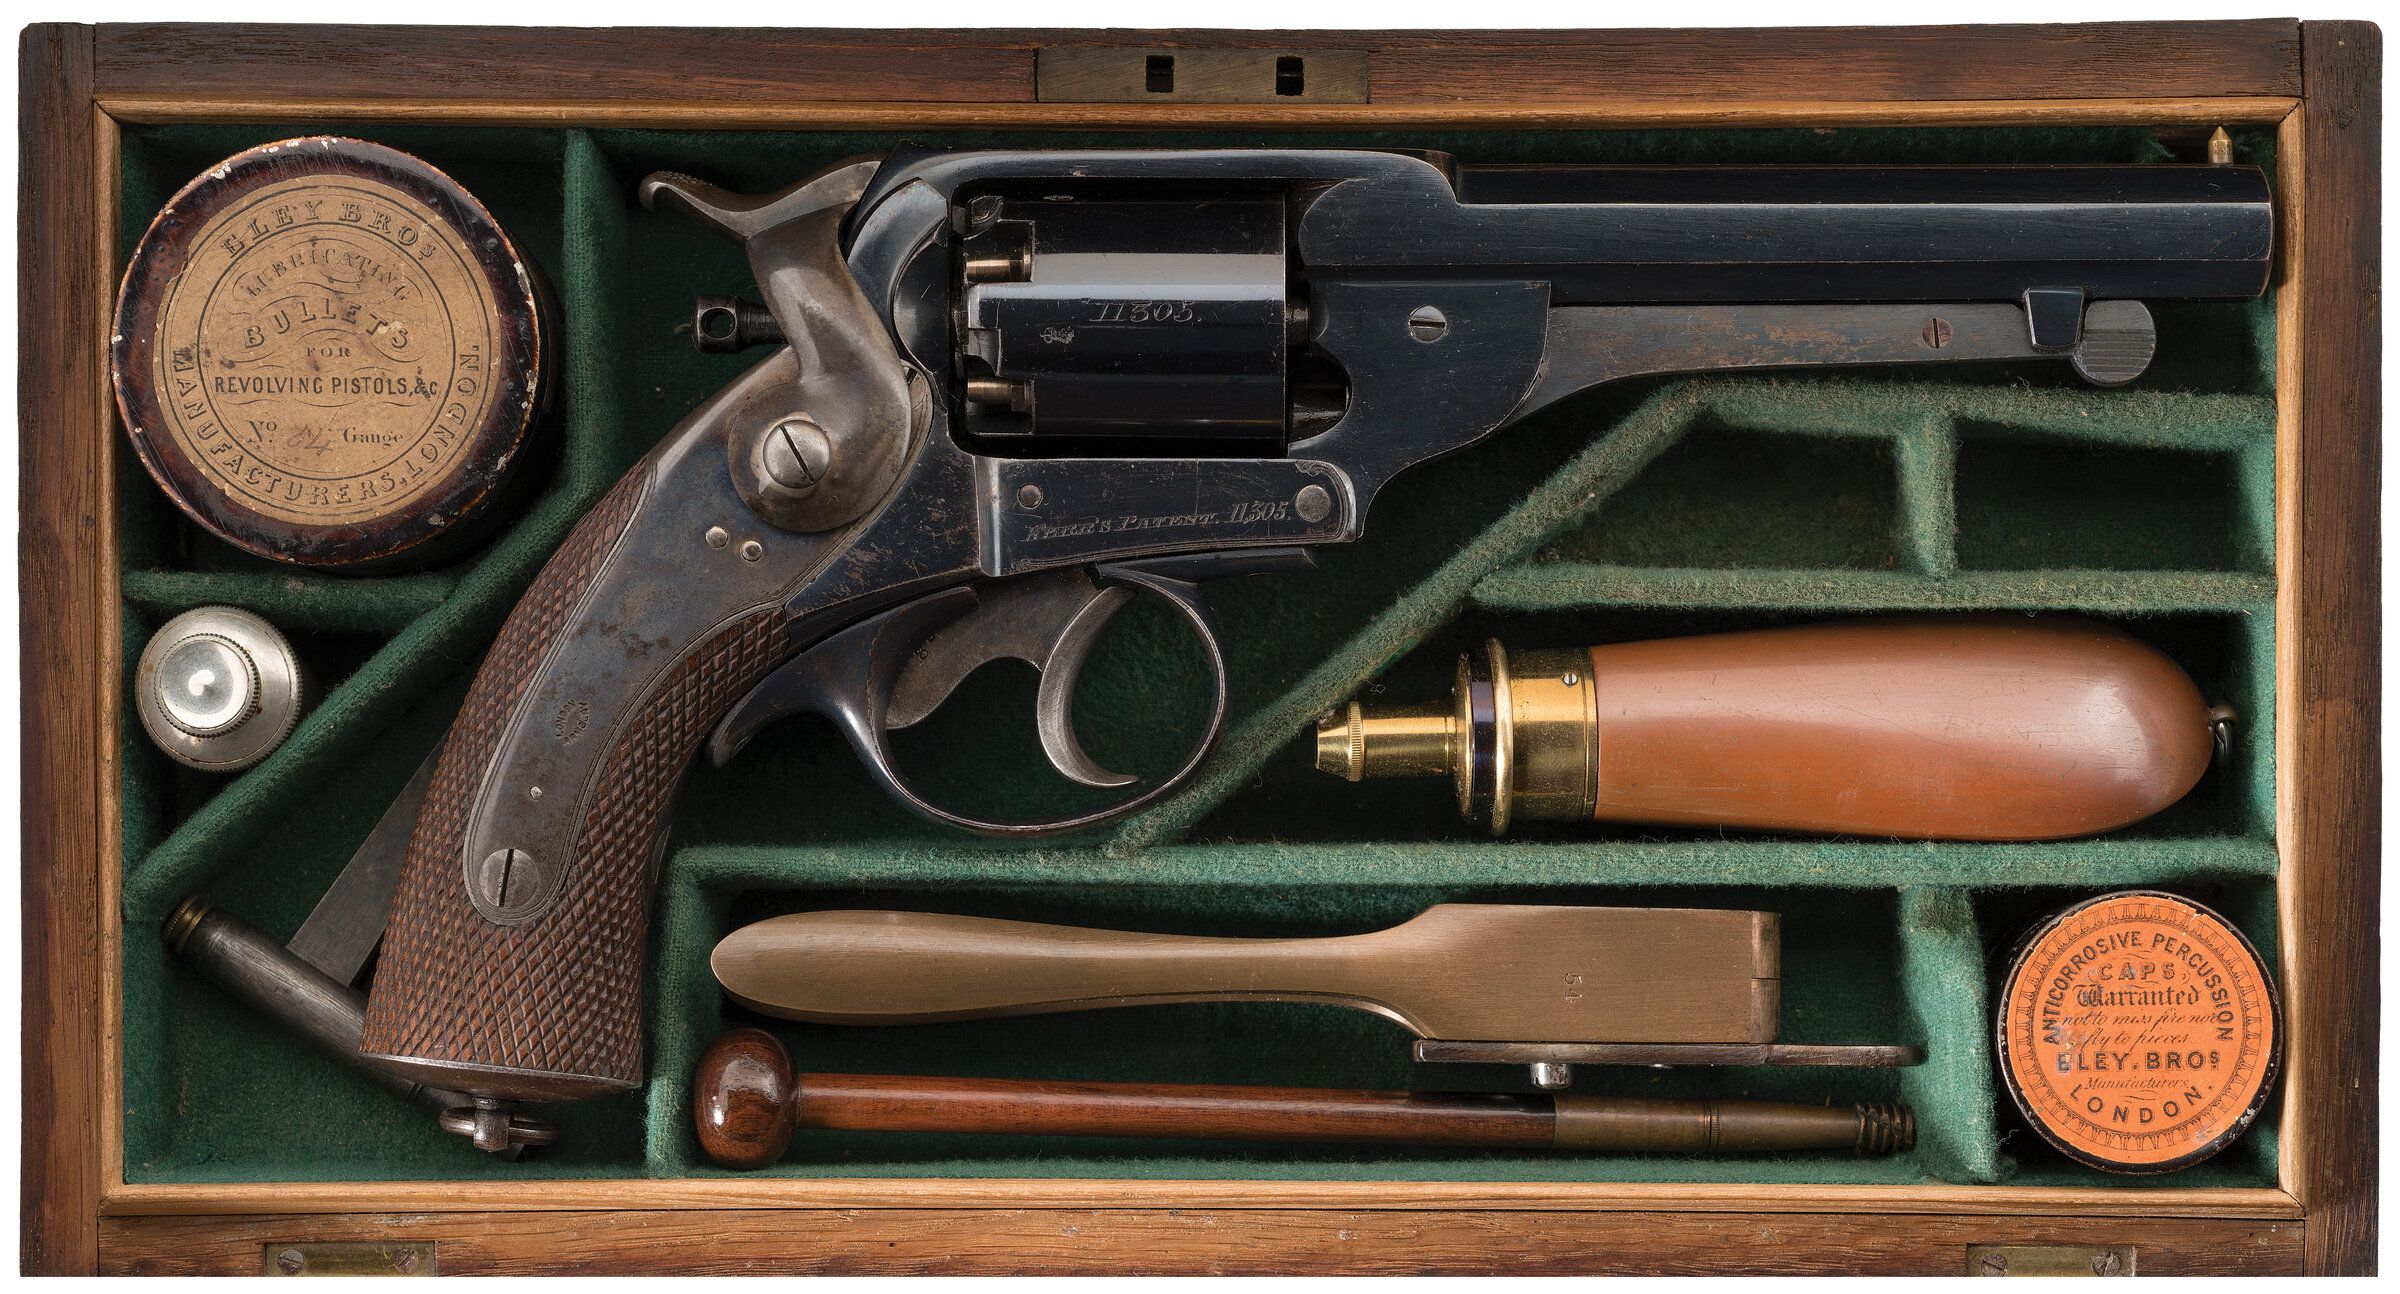 Kerr Revolver for British Lord & General for sale at M.S. Rau